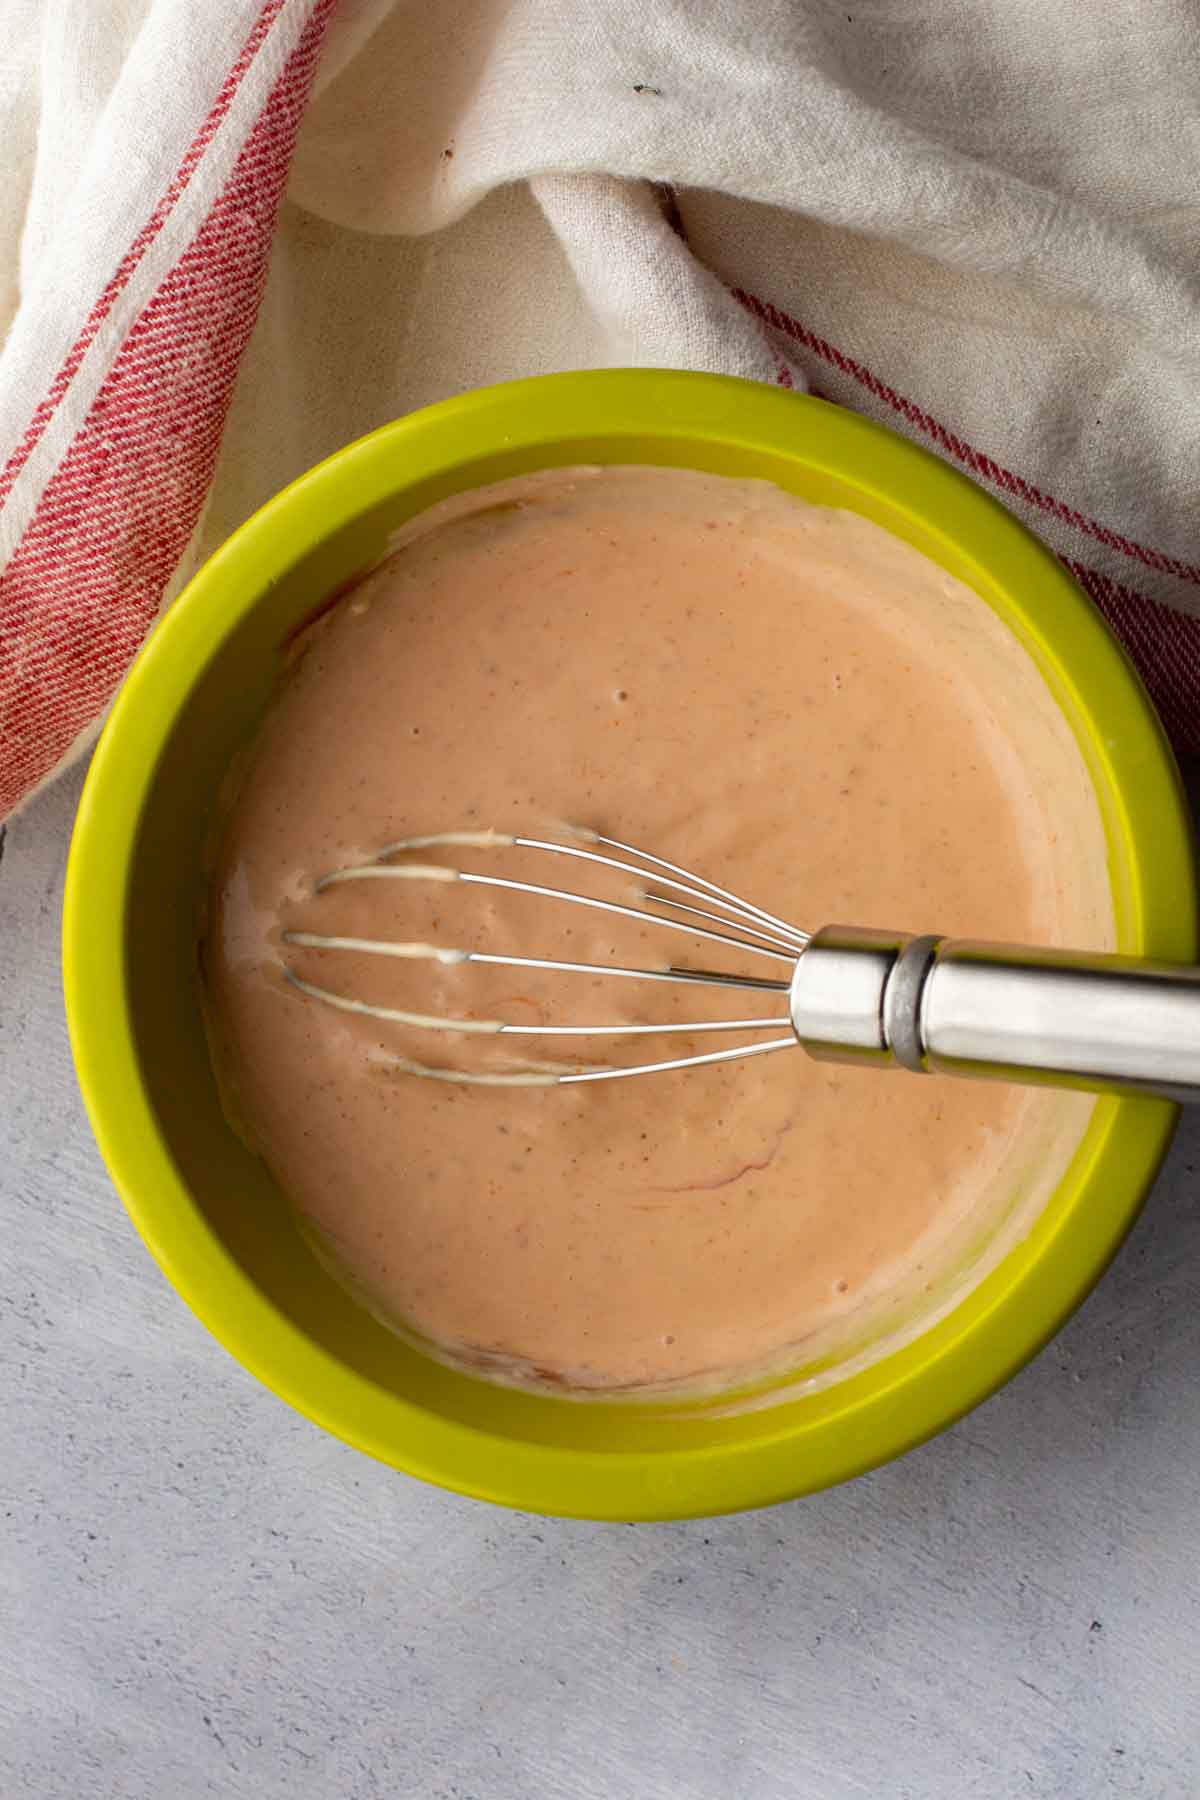 Fry Sauce for steakhouse burgers.